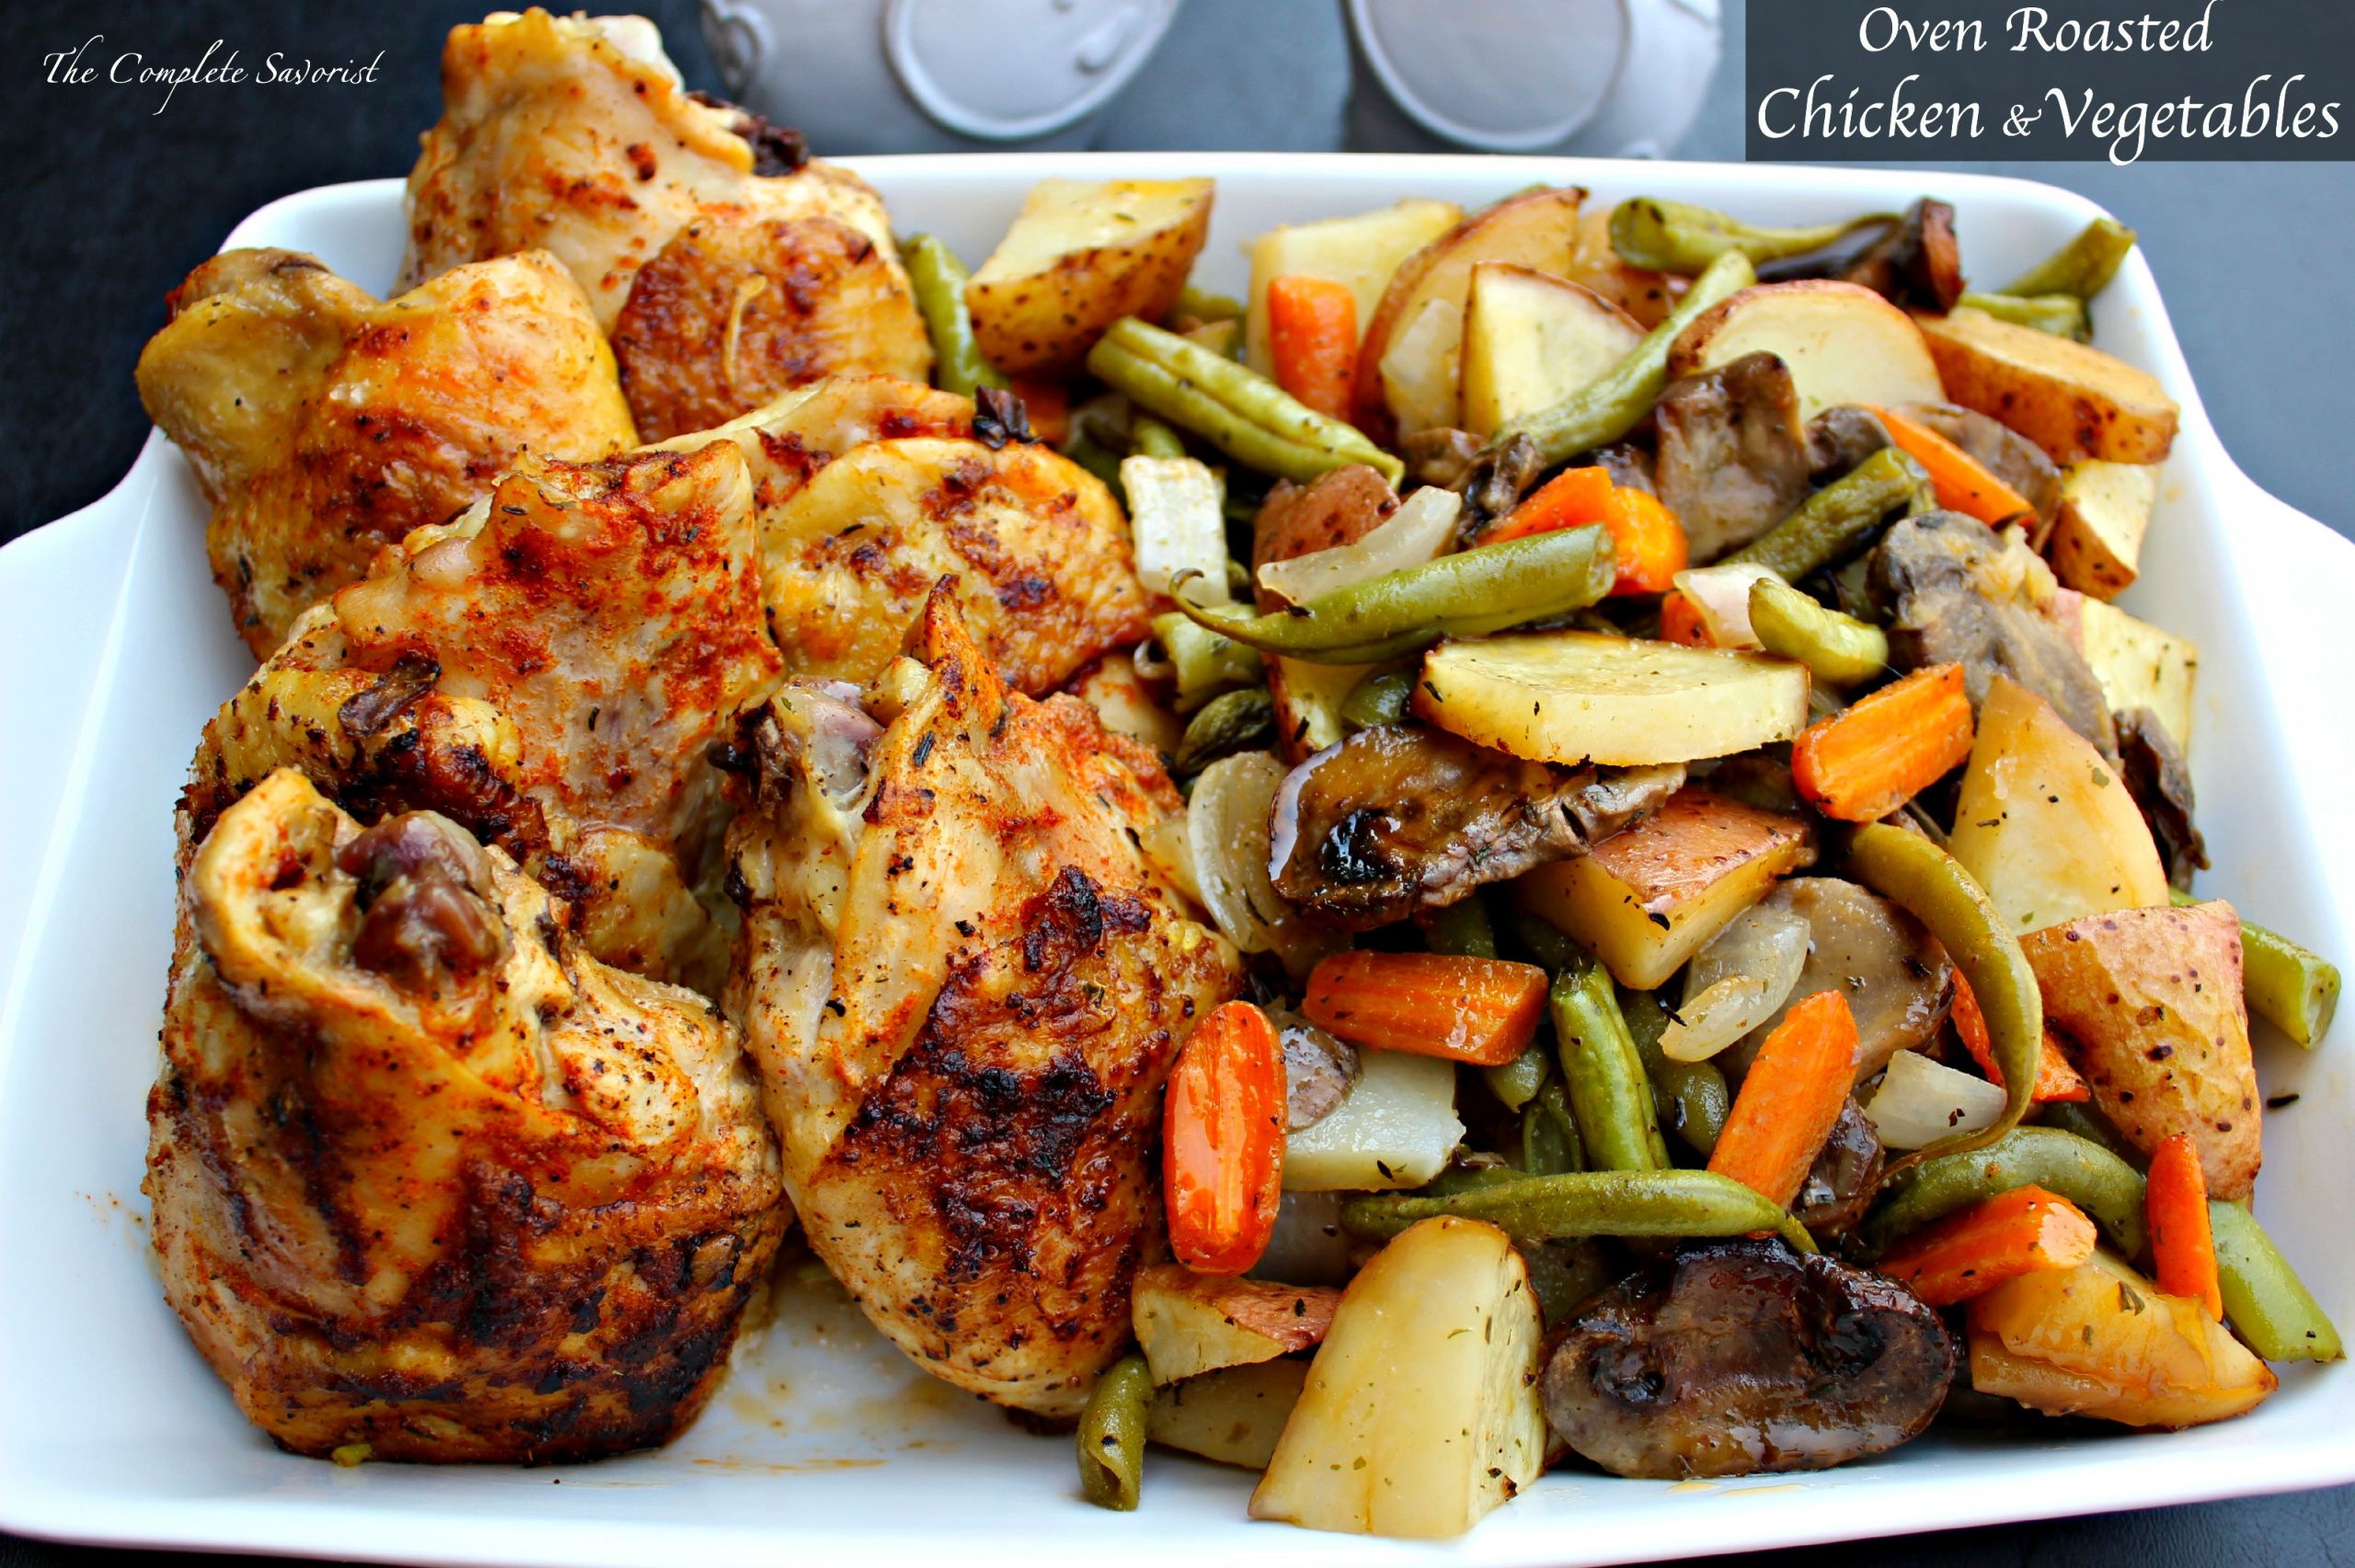 Oven Roasted Chicken And Veggies
 Oven Roasted Chicken and Ve ables The plete Savorist